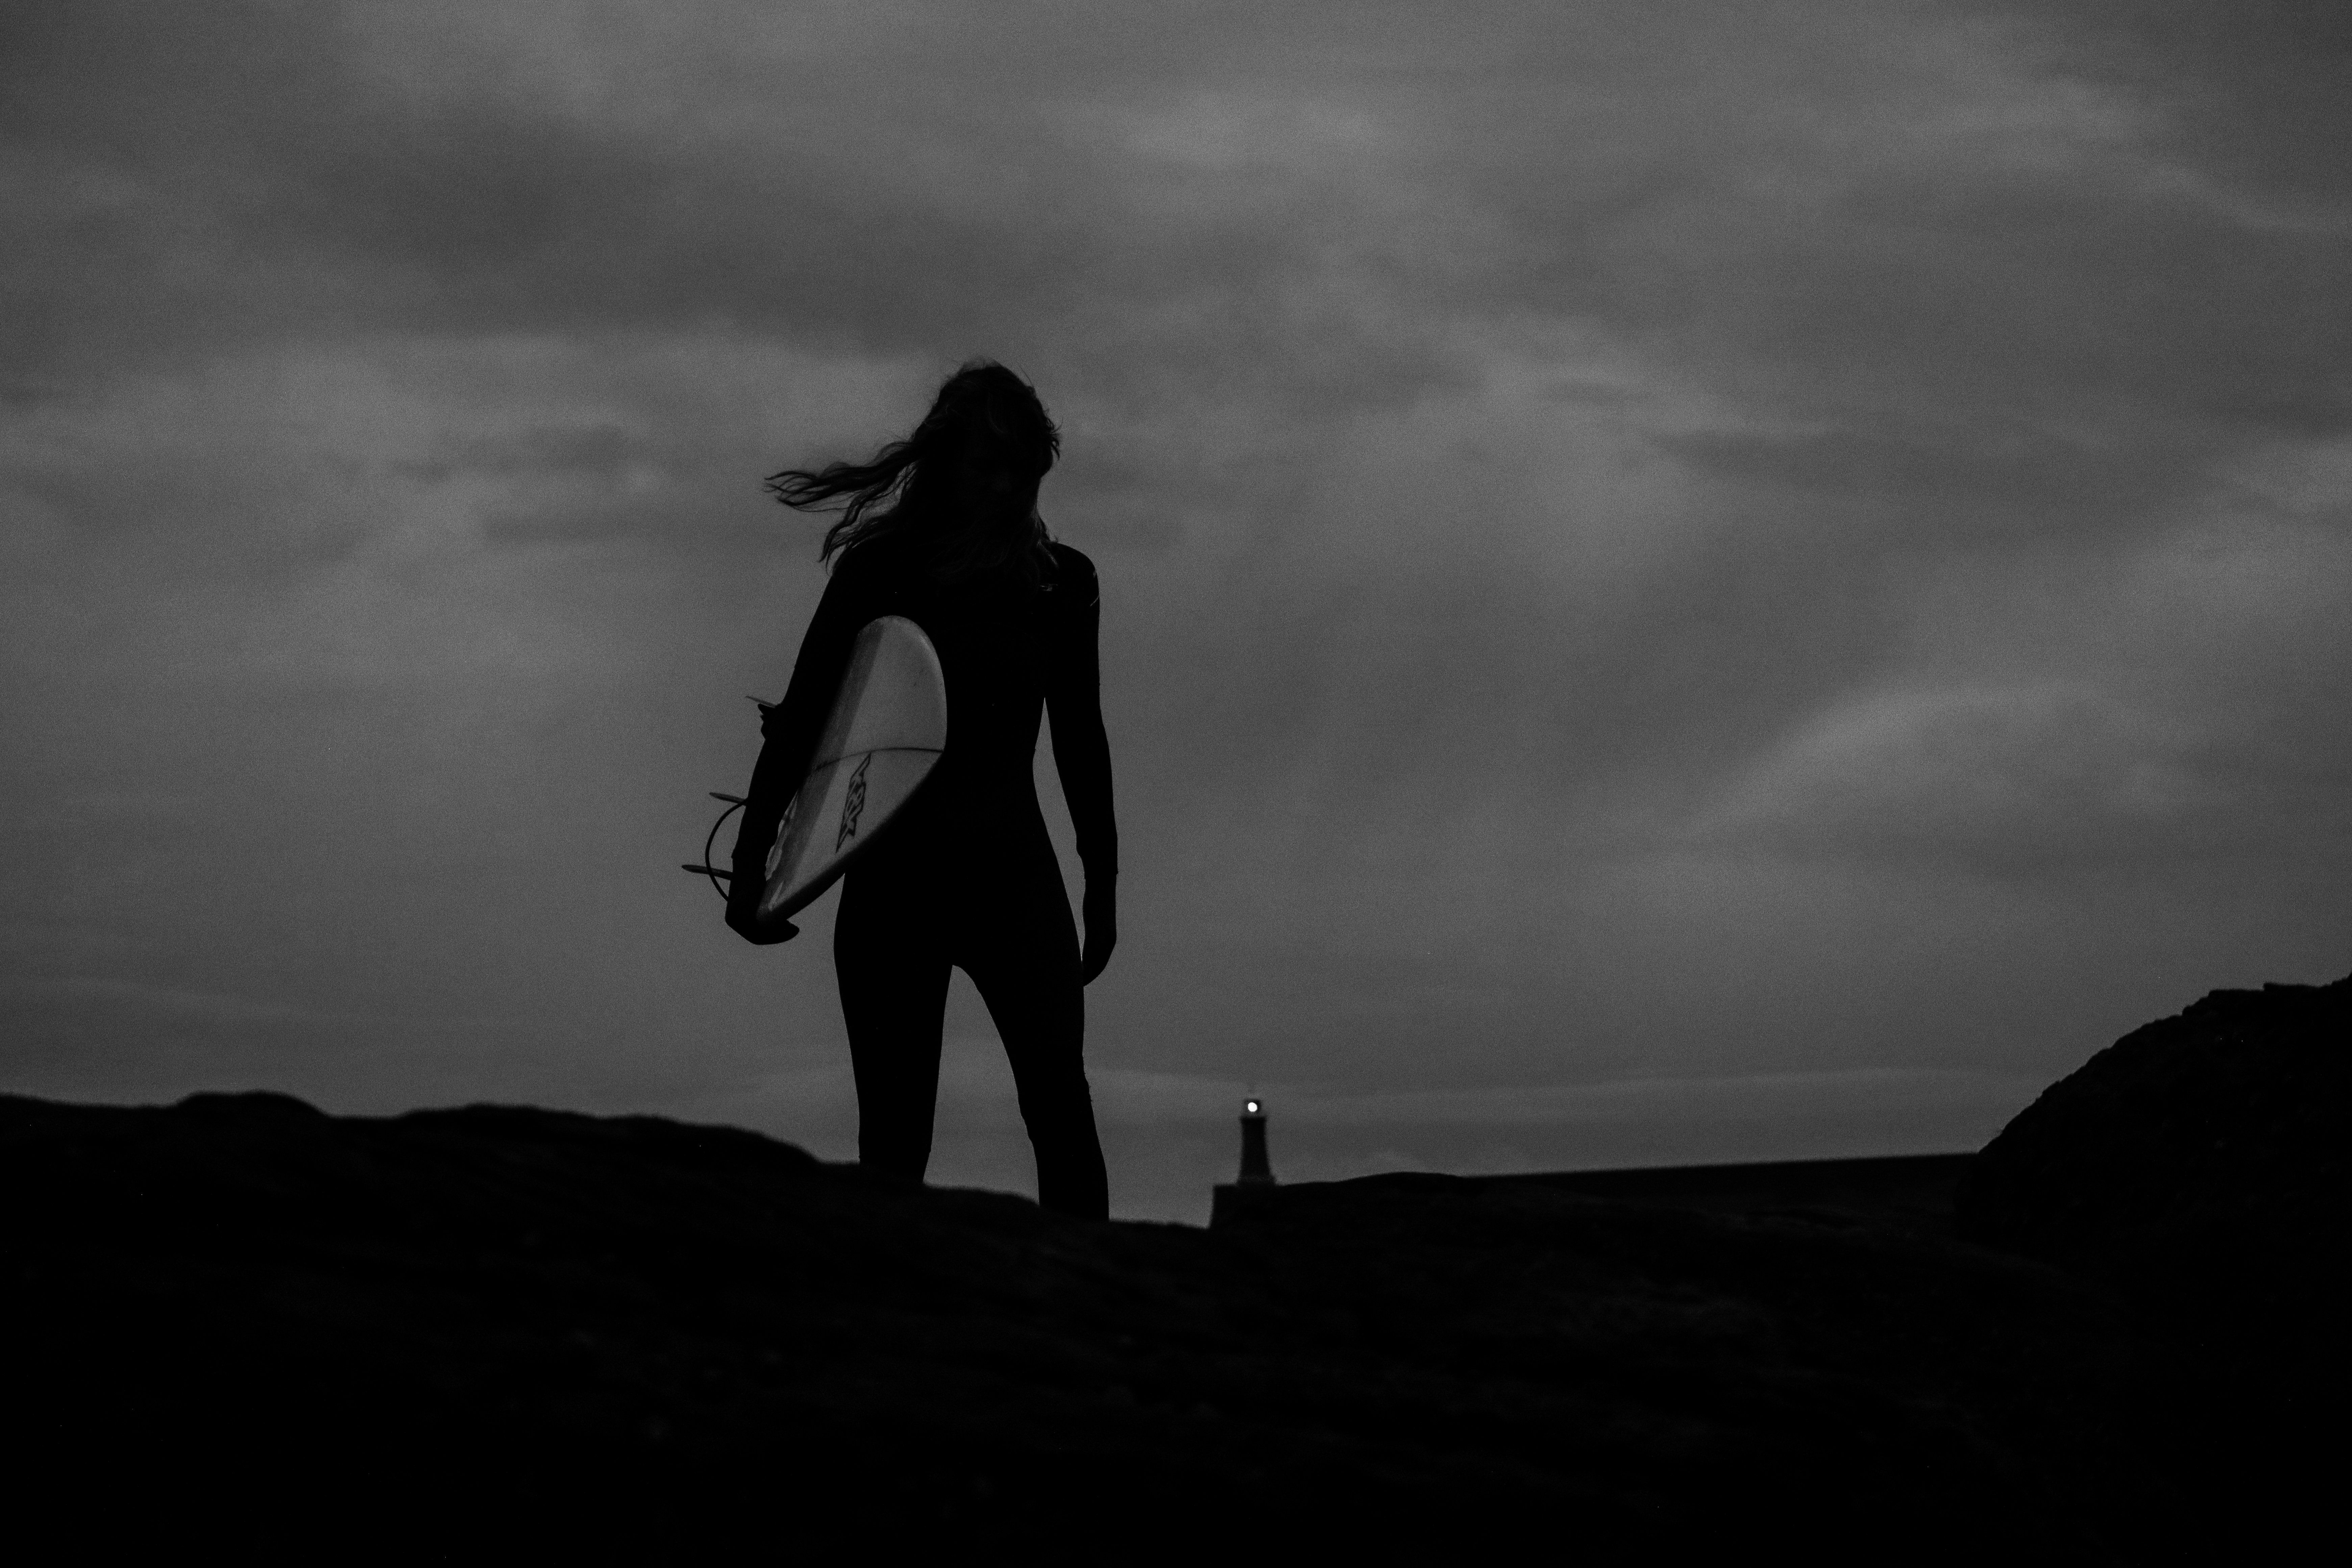 A female surfer is silhouetted against a cloudy sky in very low light, with a lighthouse on the horizon.